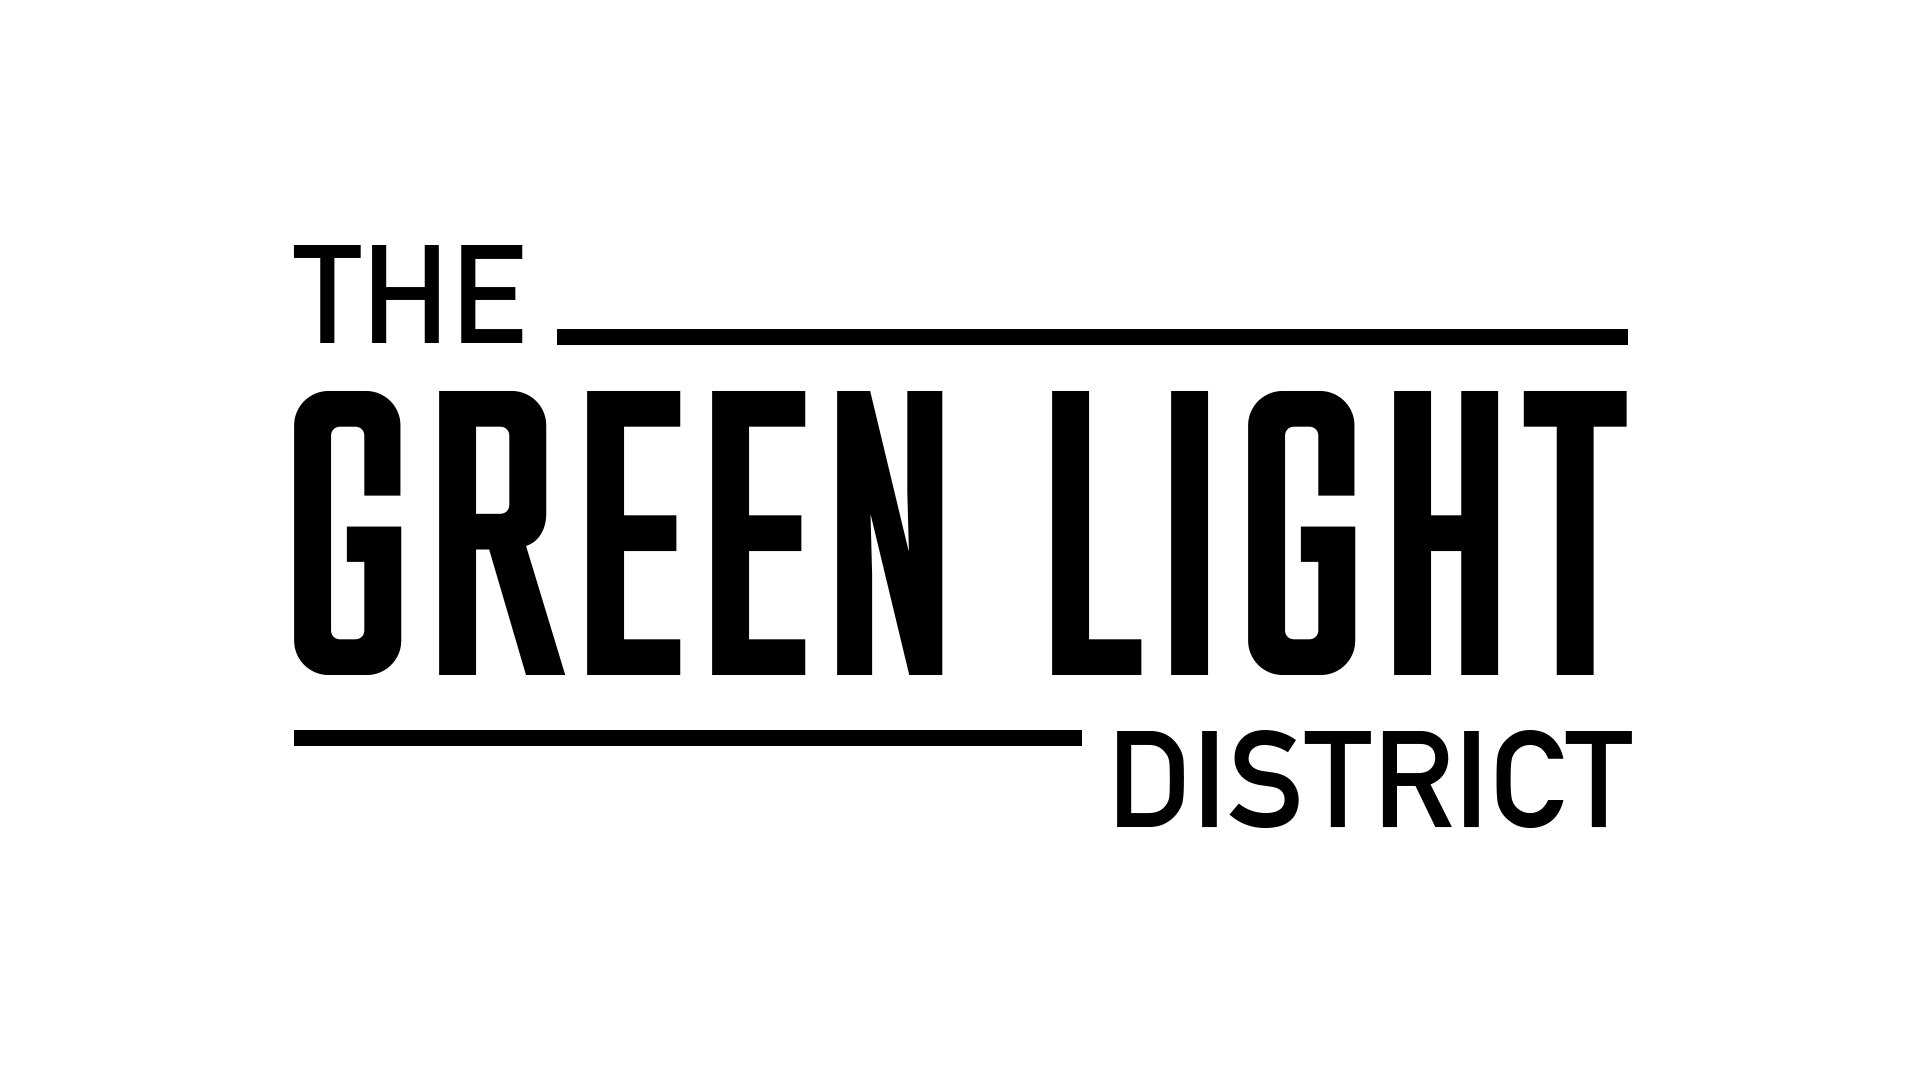 Green and Gray Logo - Green Light District logo - One25